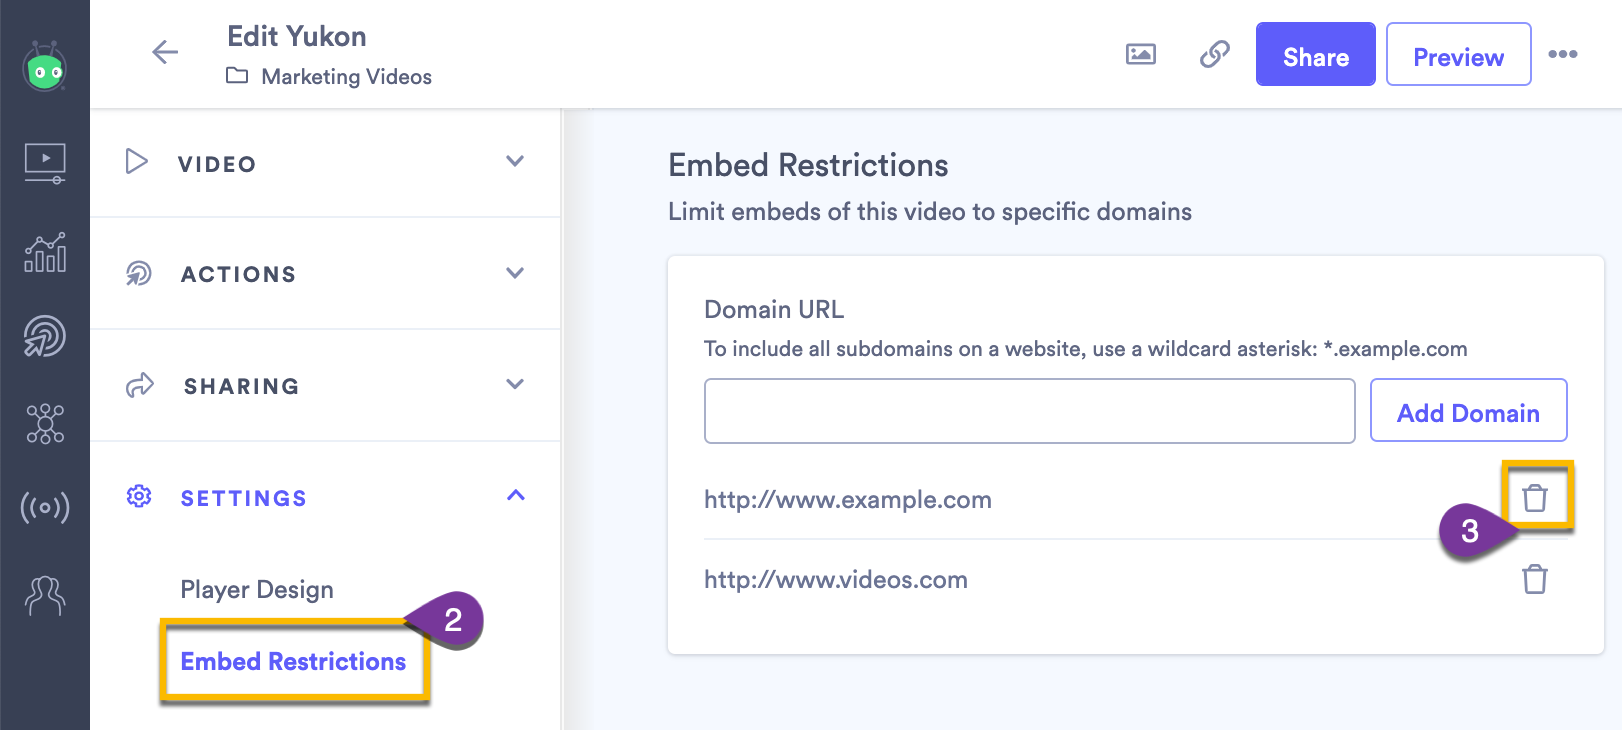 Video settings page showing how to delete domains from allowed embedding list